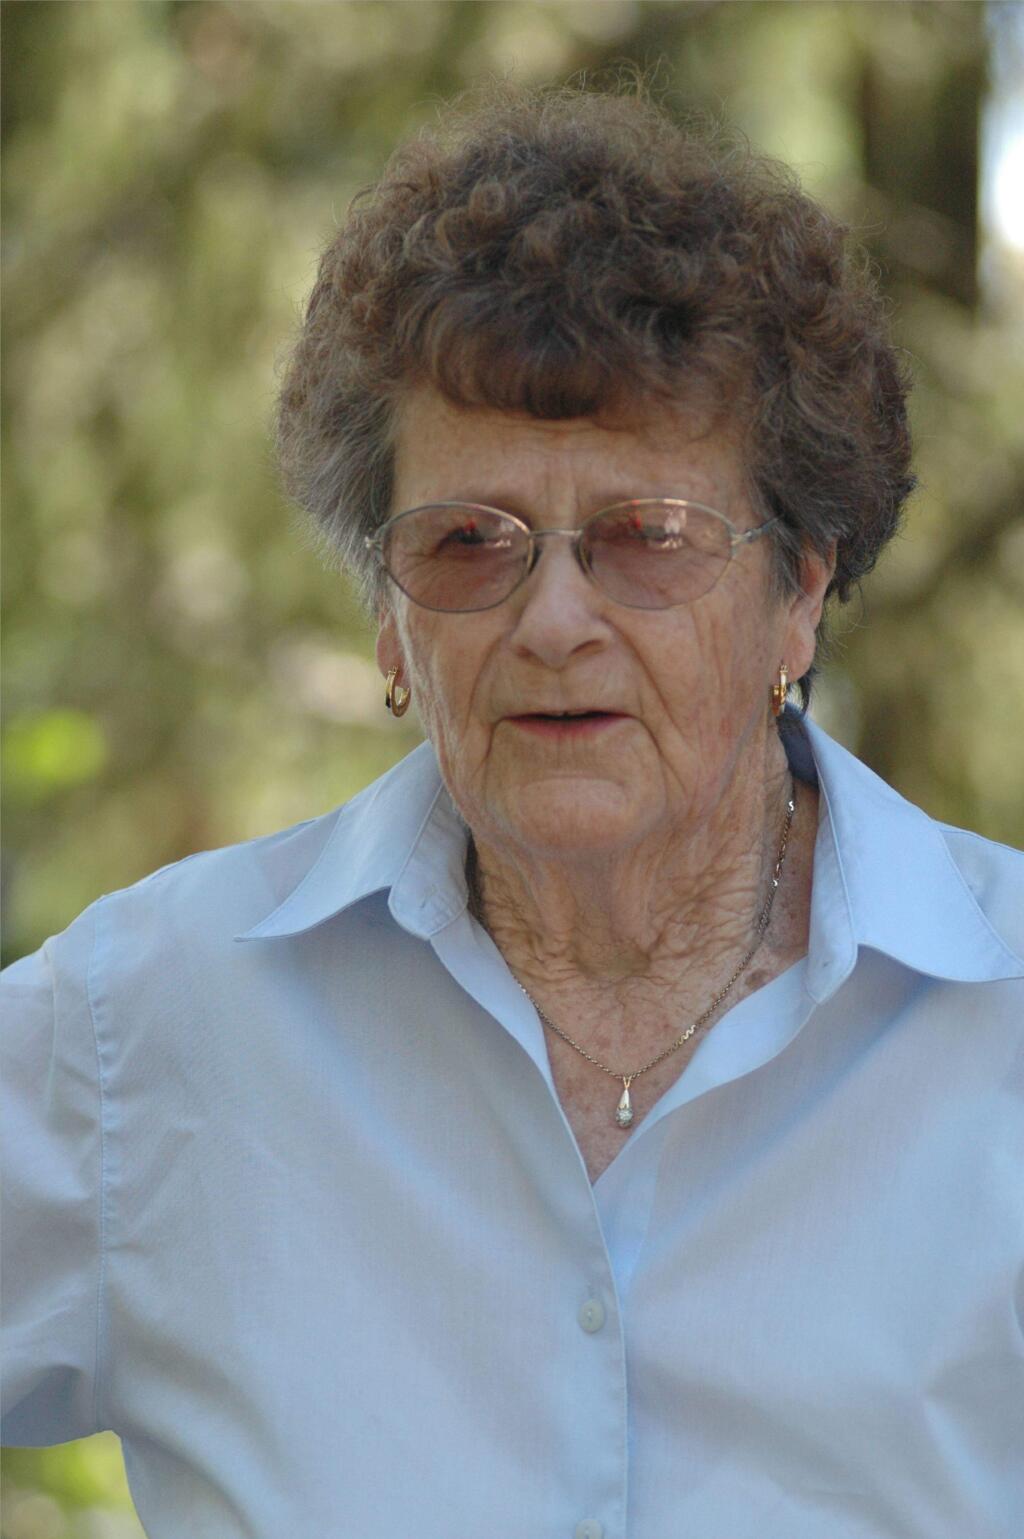 Helen Millerick Larson, Larson family matriarch, passed away surrounded by family on June 24 after a brief decline.